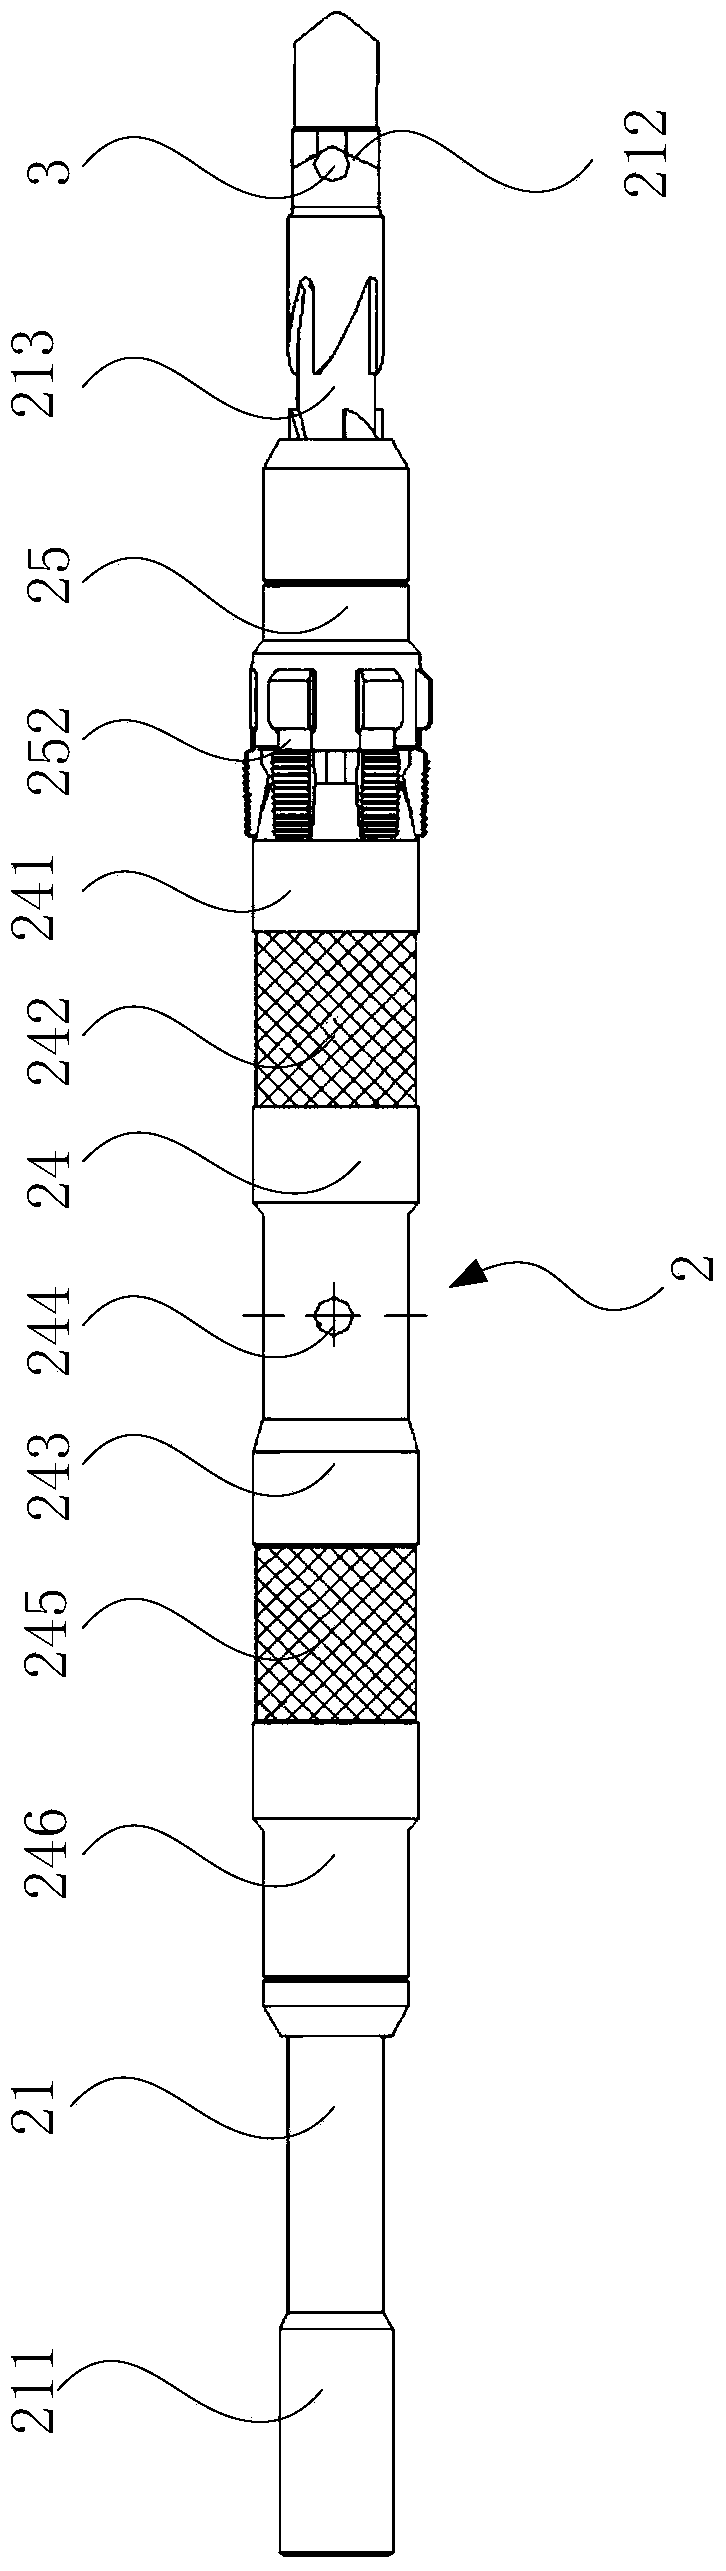 A fracturing hole opening and closing system